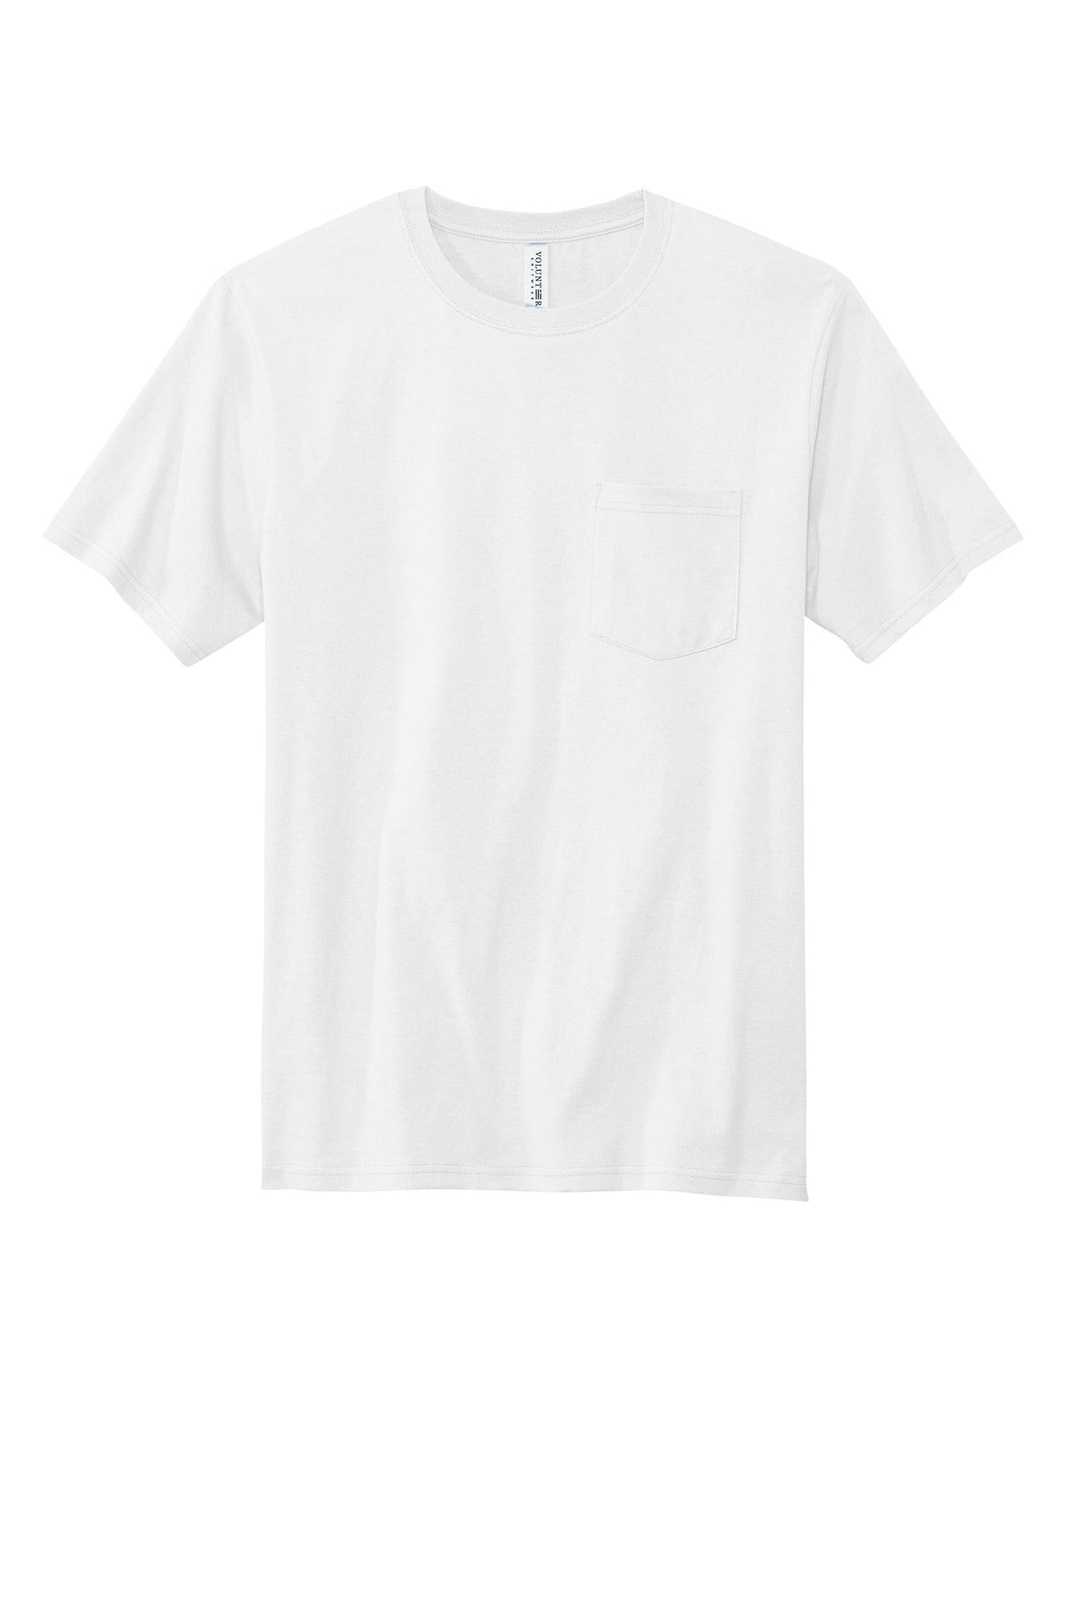 Volunteer Knitwear VL100P All-American Pocket Tee - White - HIT a Double - 1